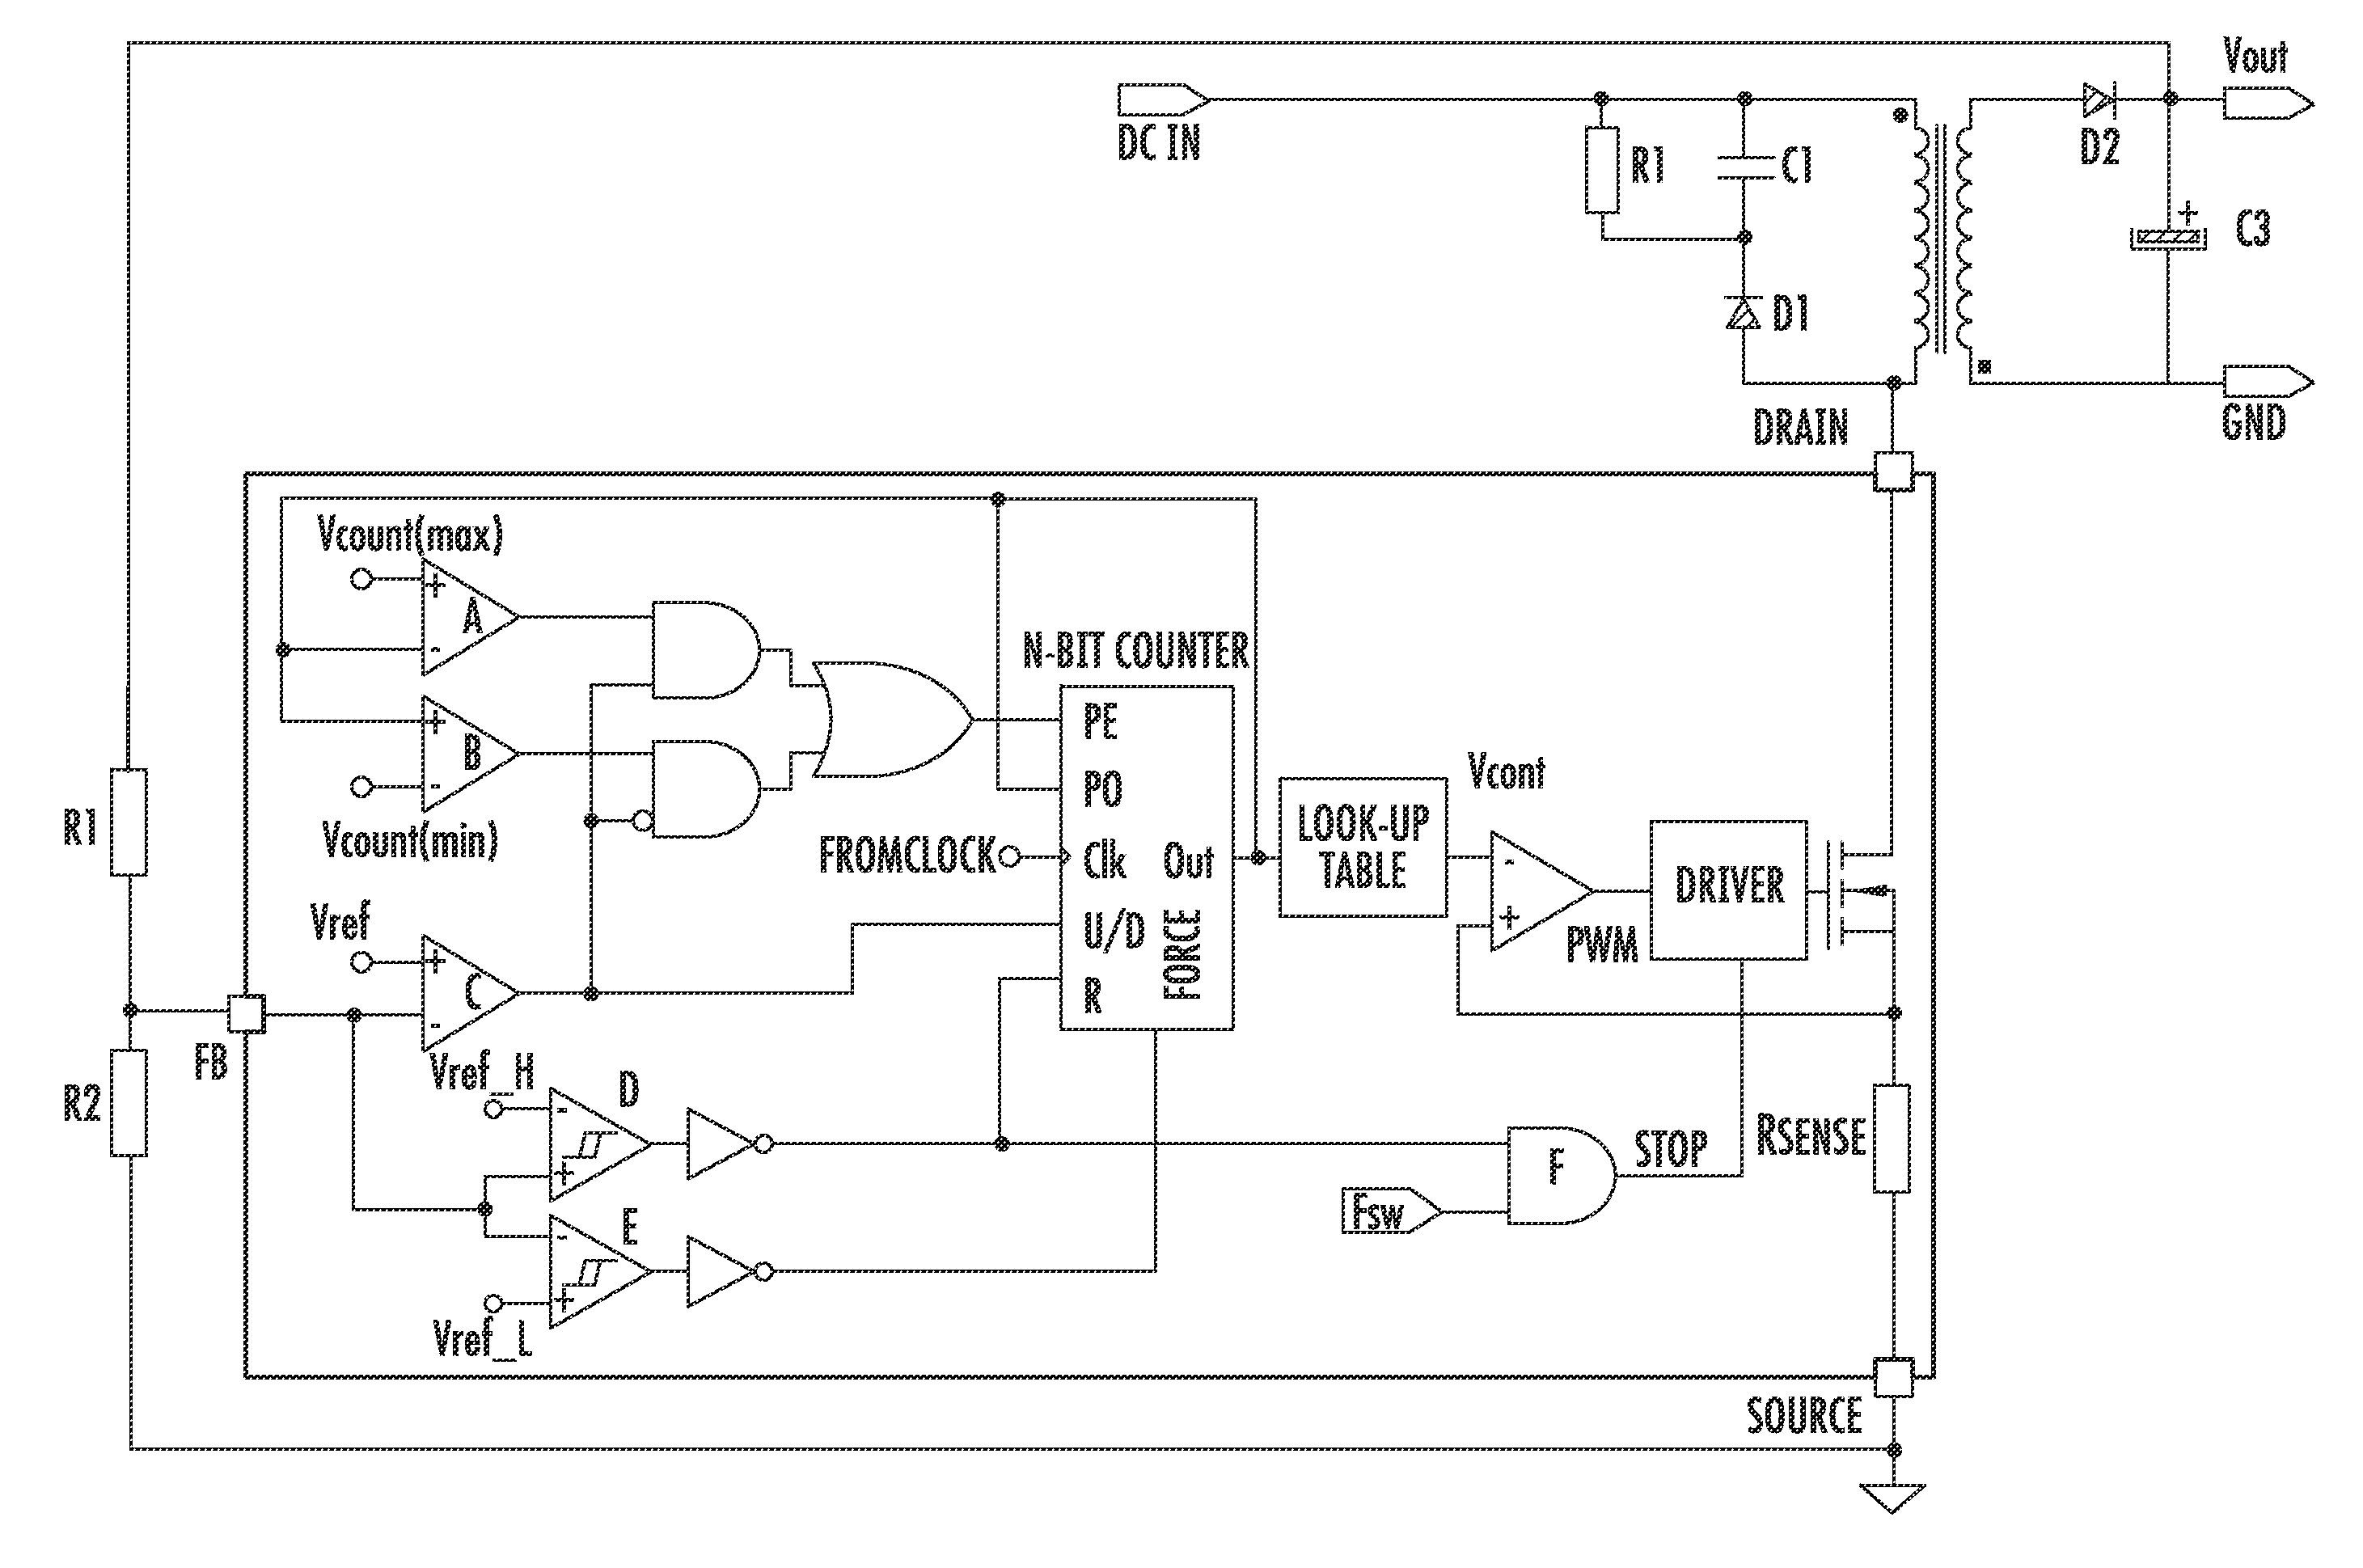 Current mode digital control of the output voltage of a switching power supply